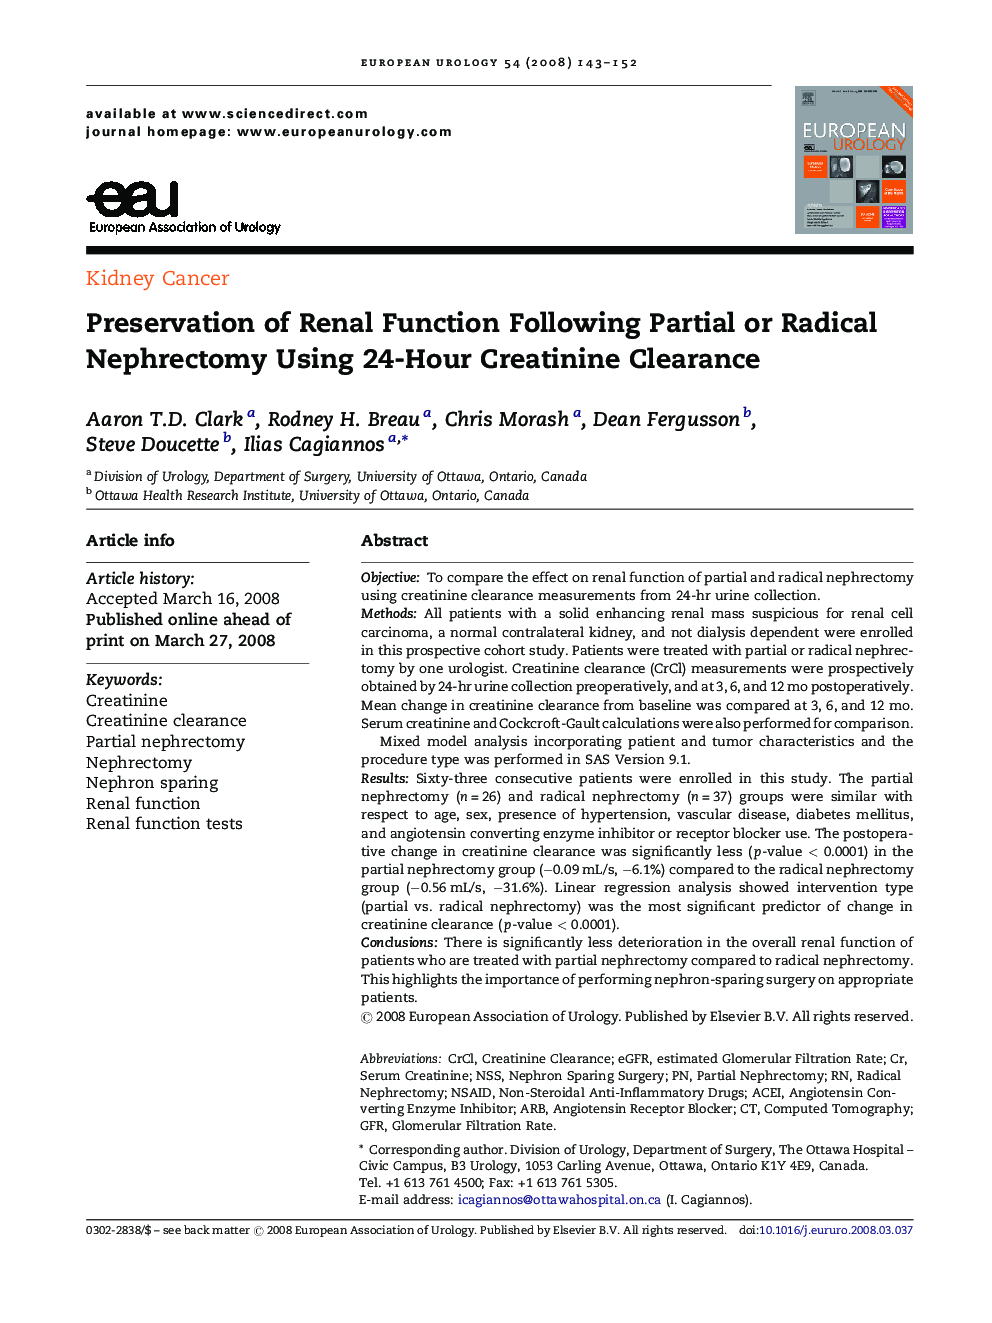 Preservation of Renal Function Following Partial or Radical Nephrectomy Using 24-Hour Creatinine Clearance